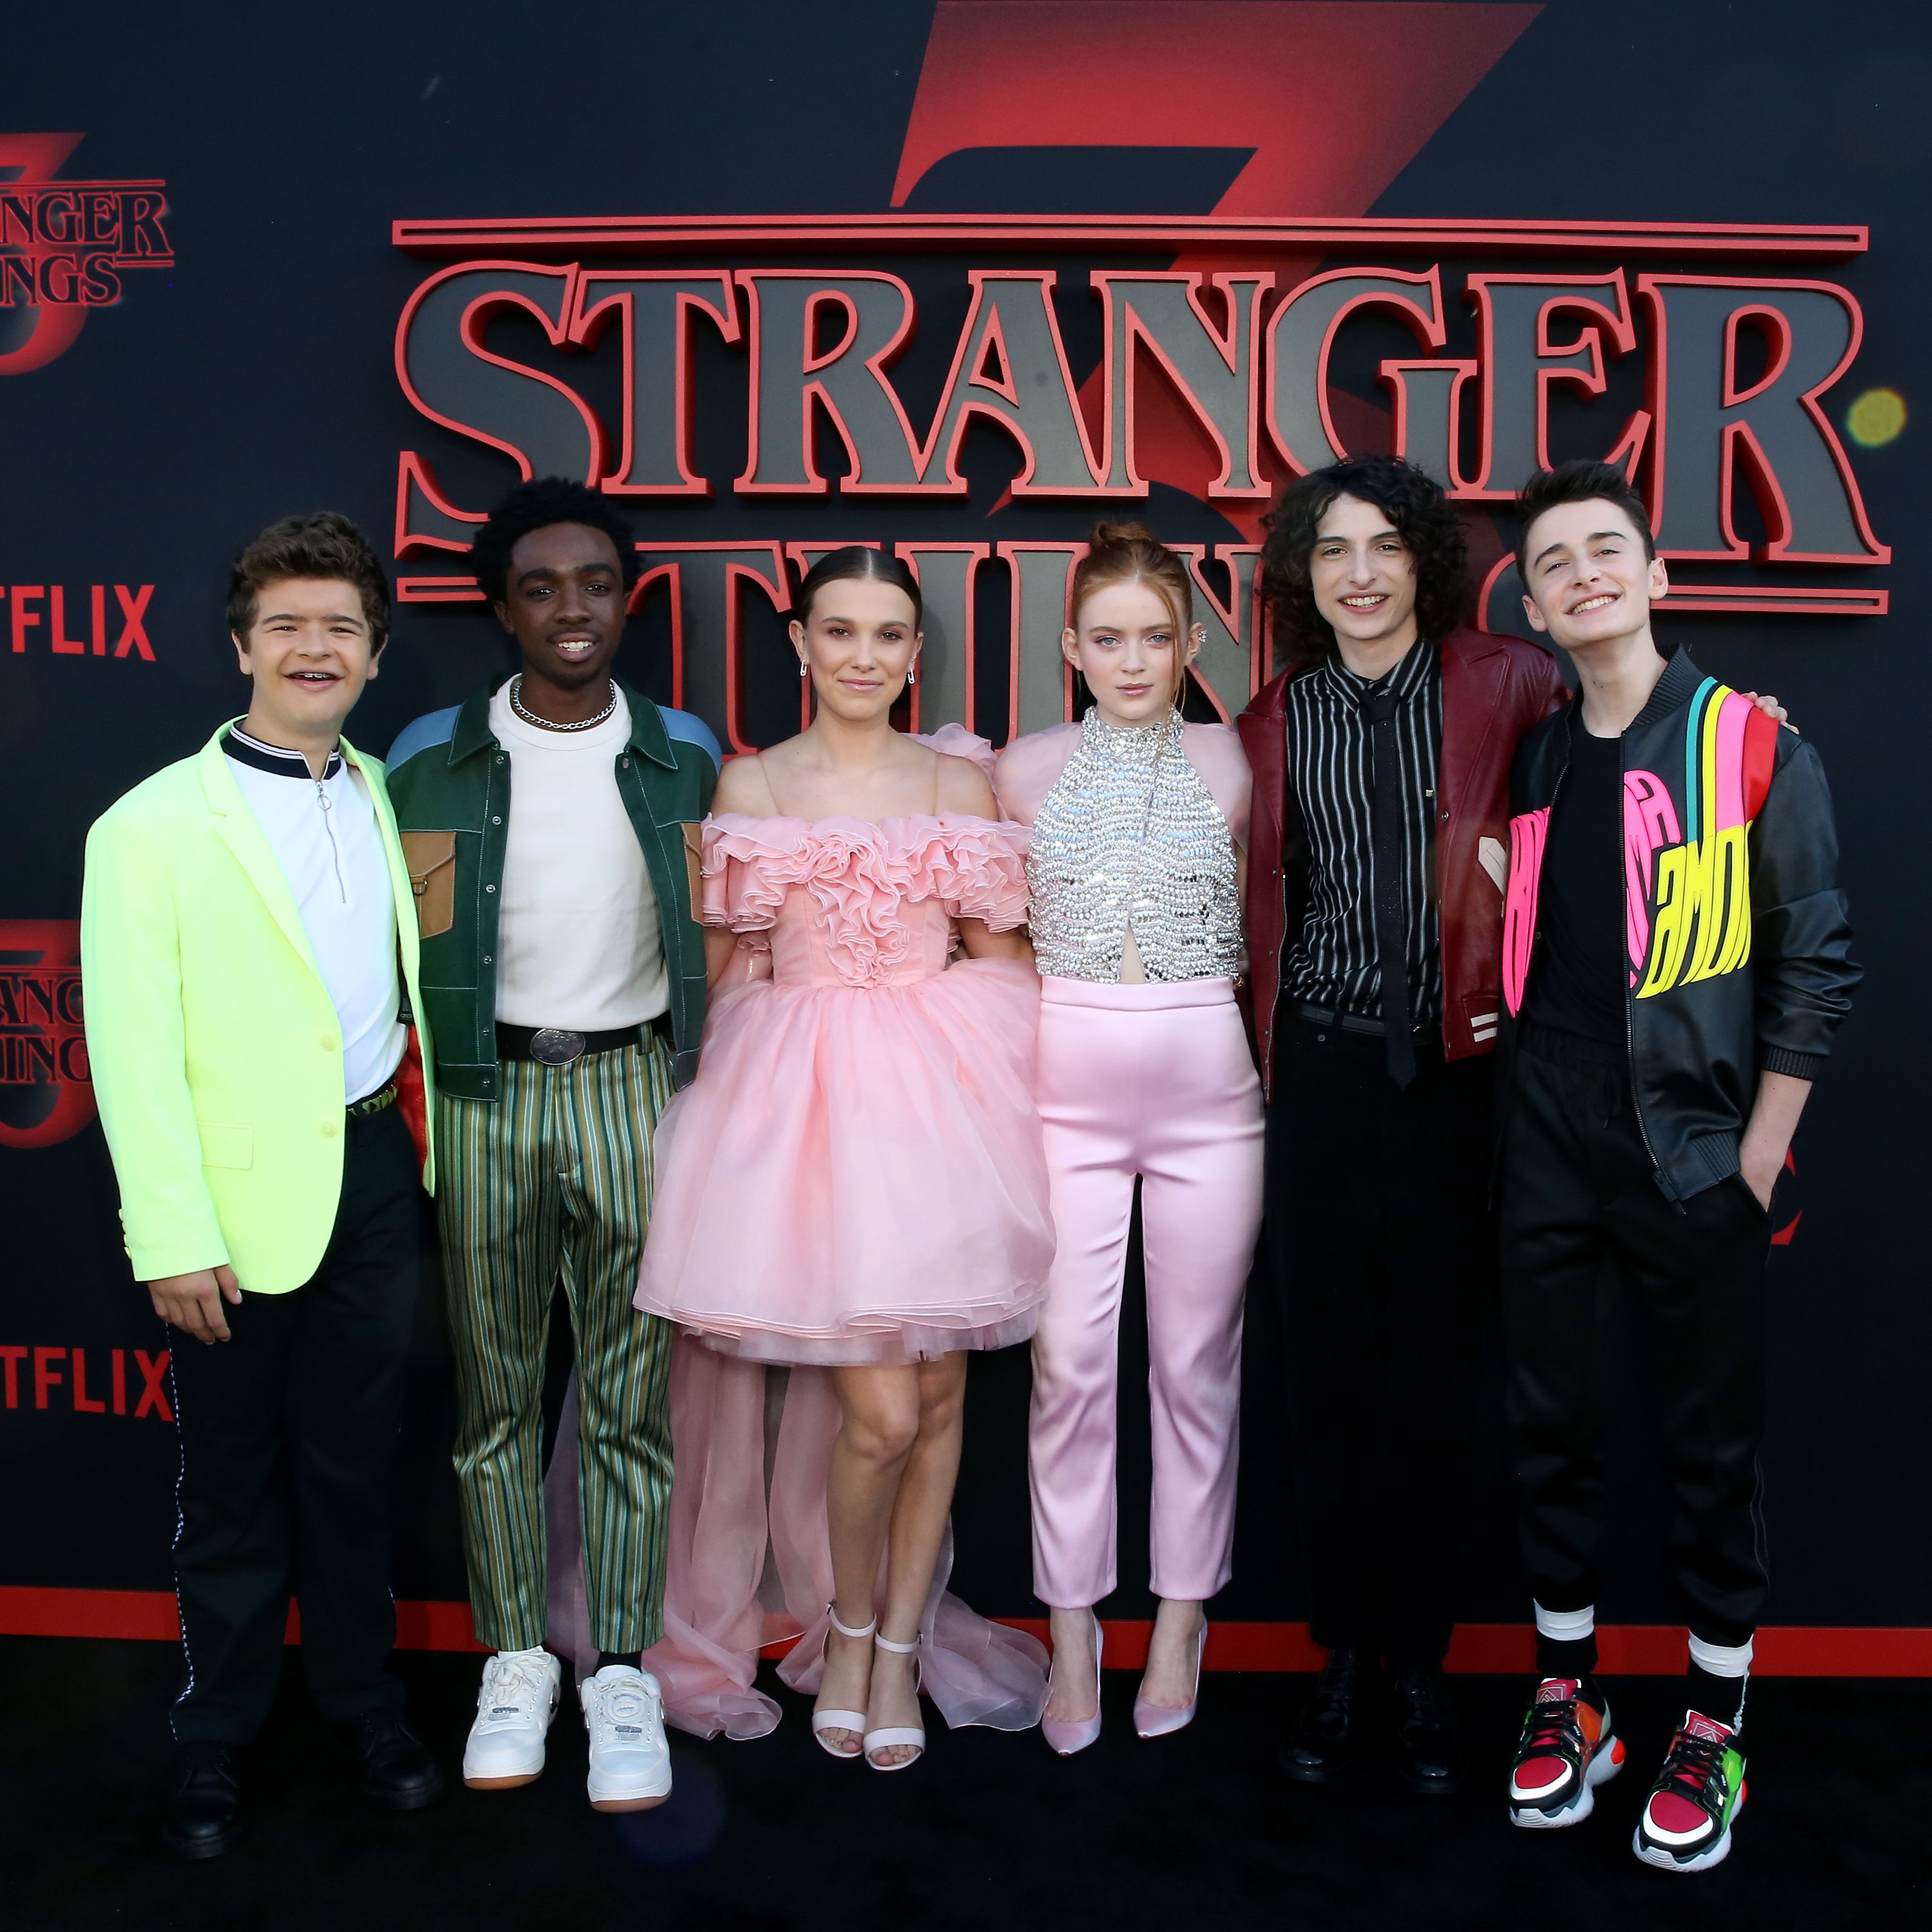 The Stranger Things Kids Have Really Grown Up Stranger Things